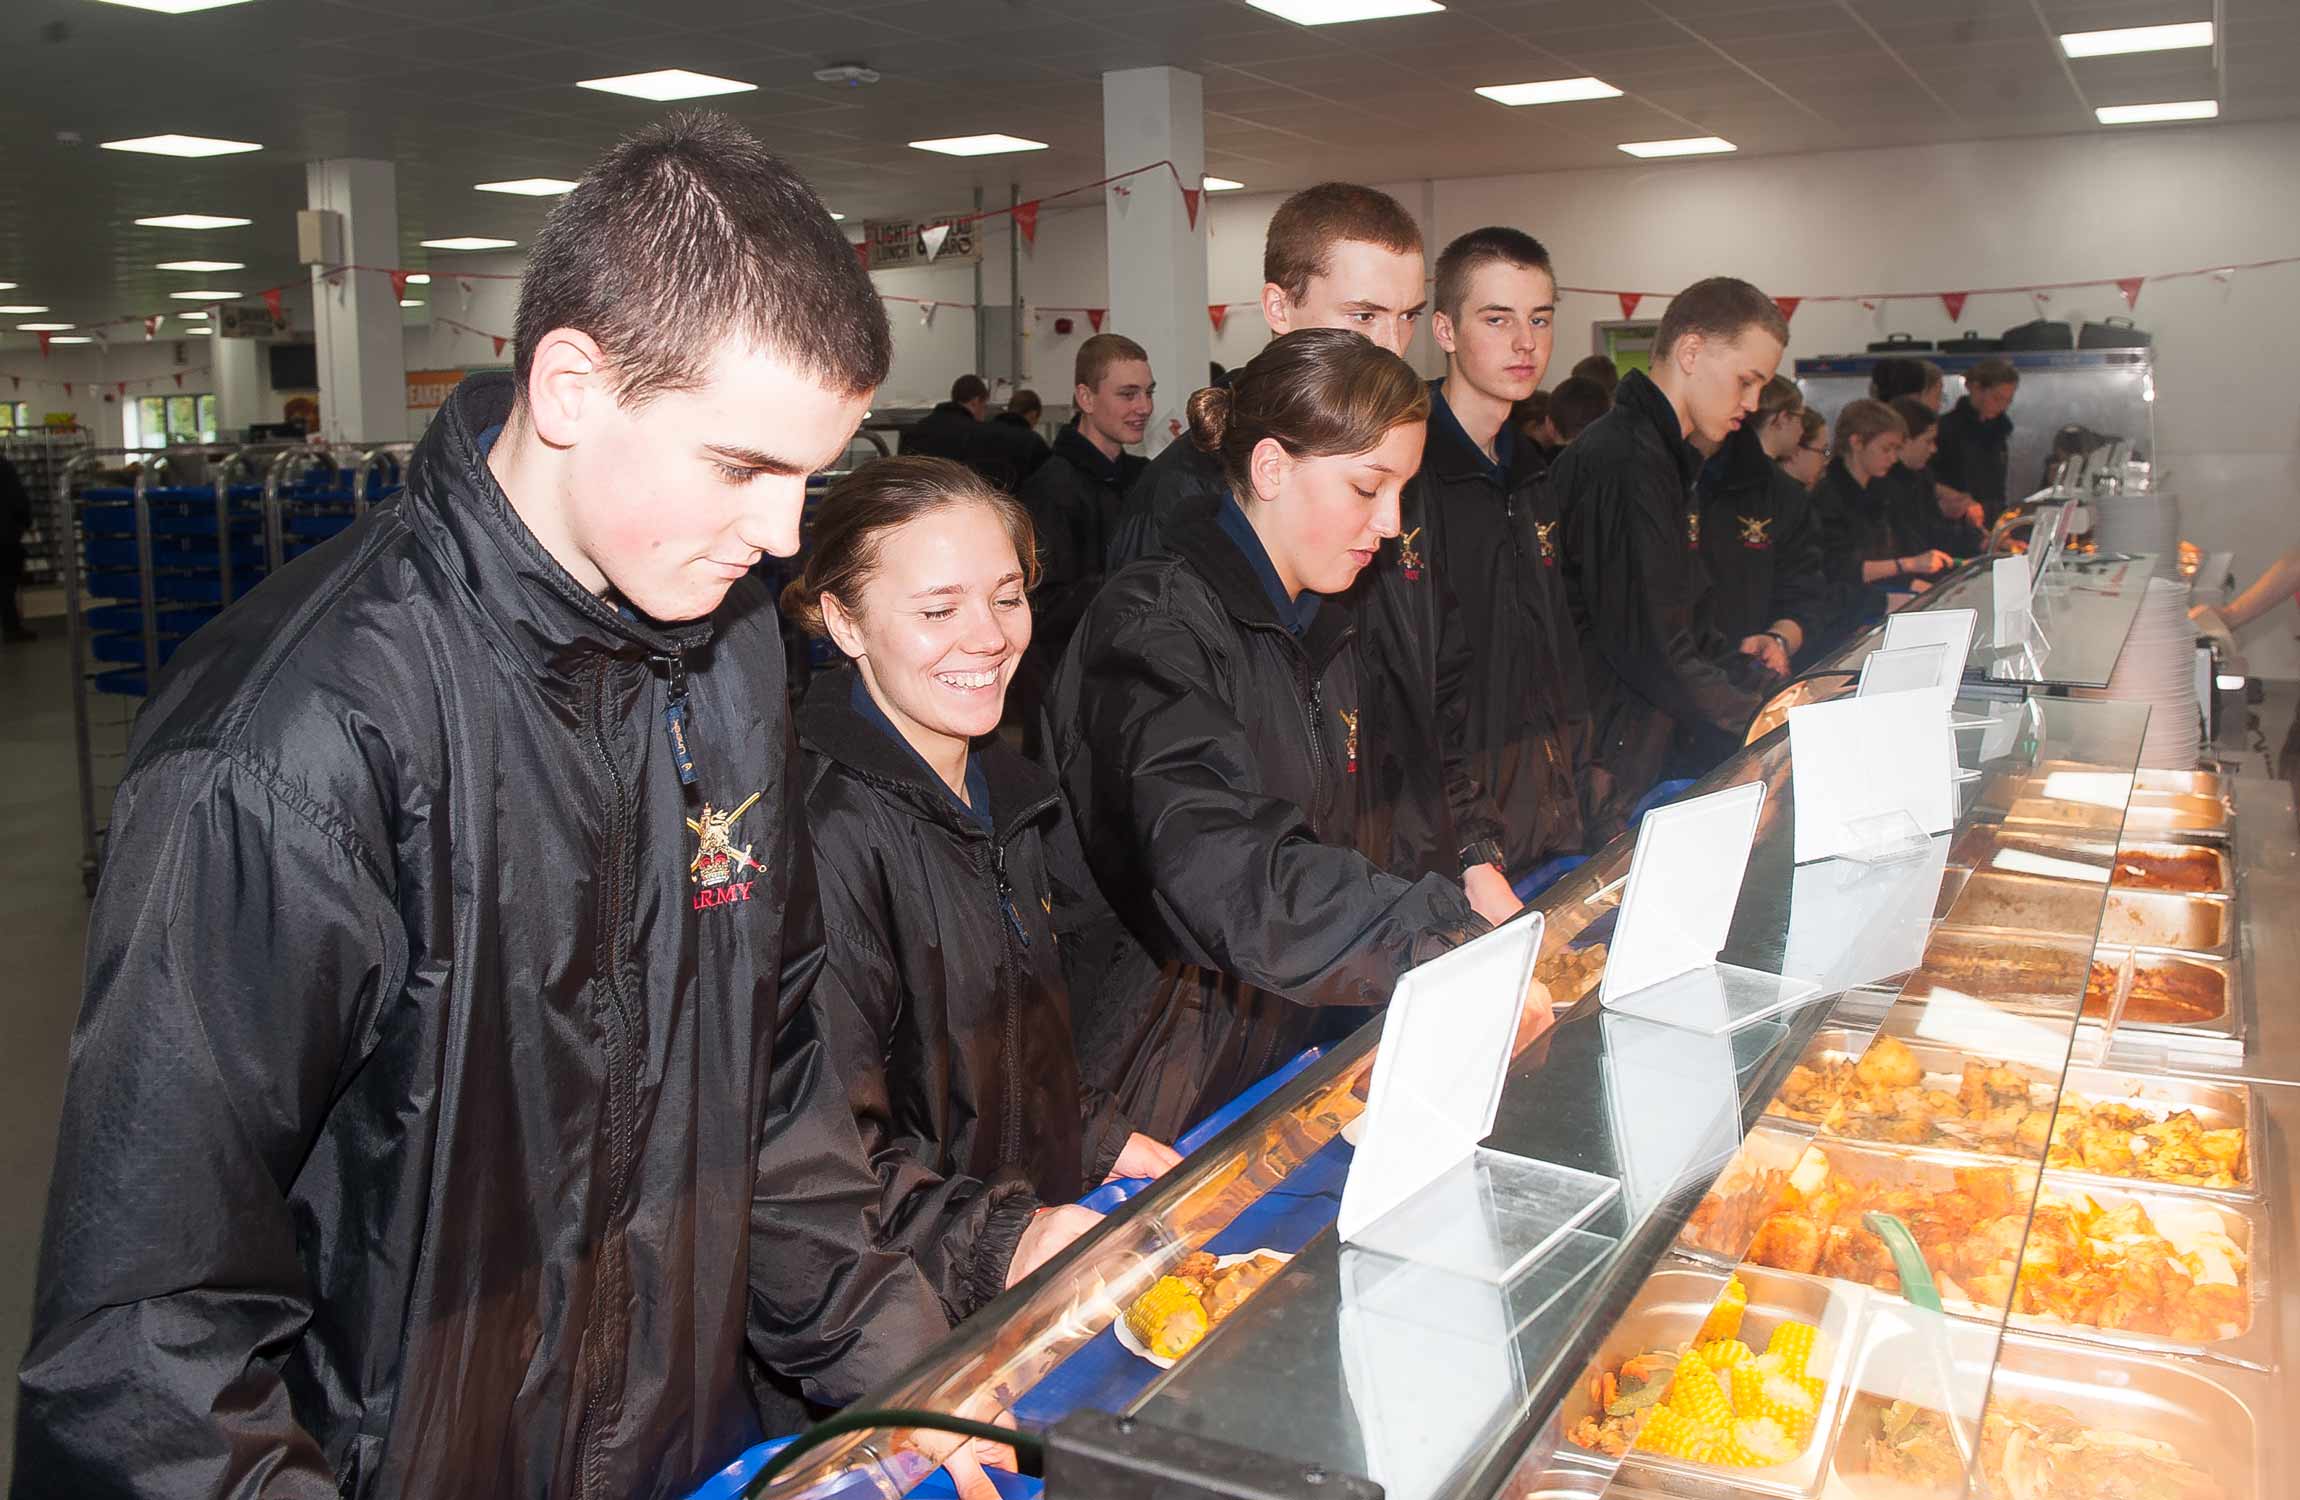 Junior Soldiers help themselves to curry